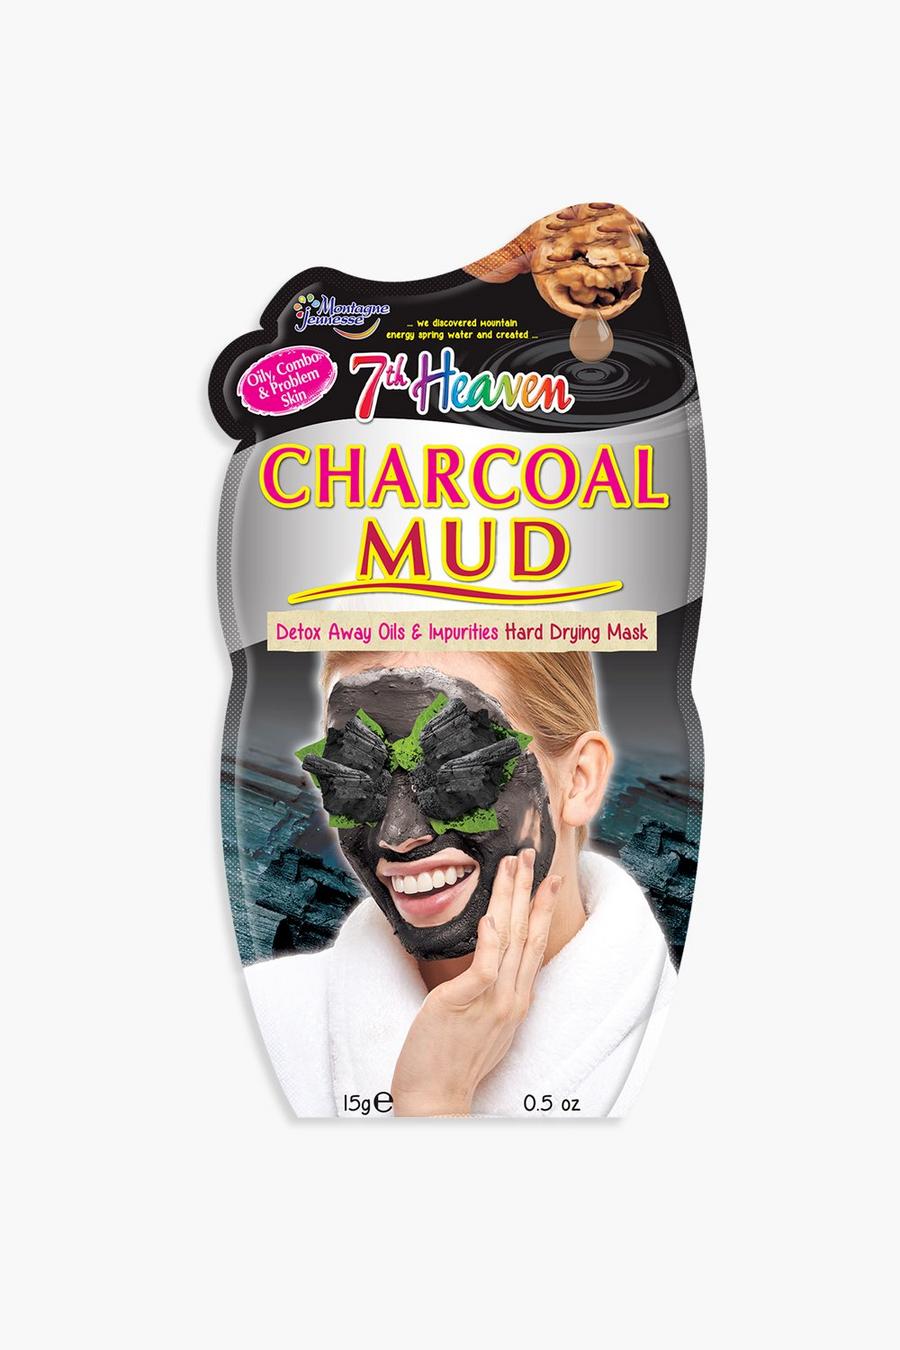 7TH HEAVEN CHARCOAL LERMASK image number 1